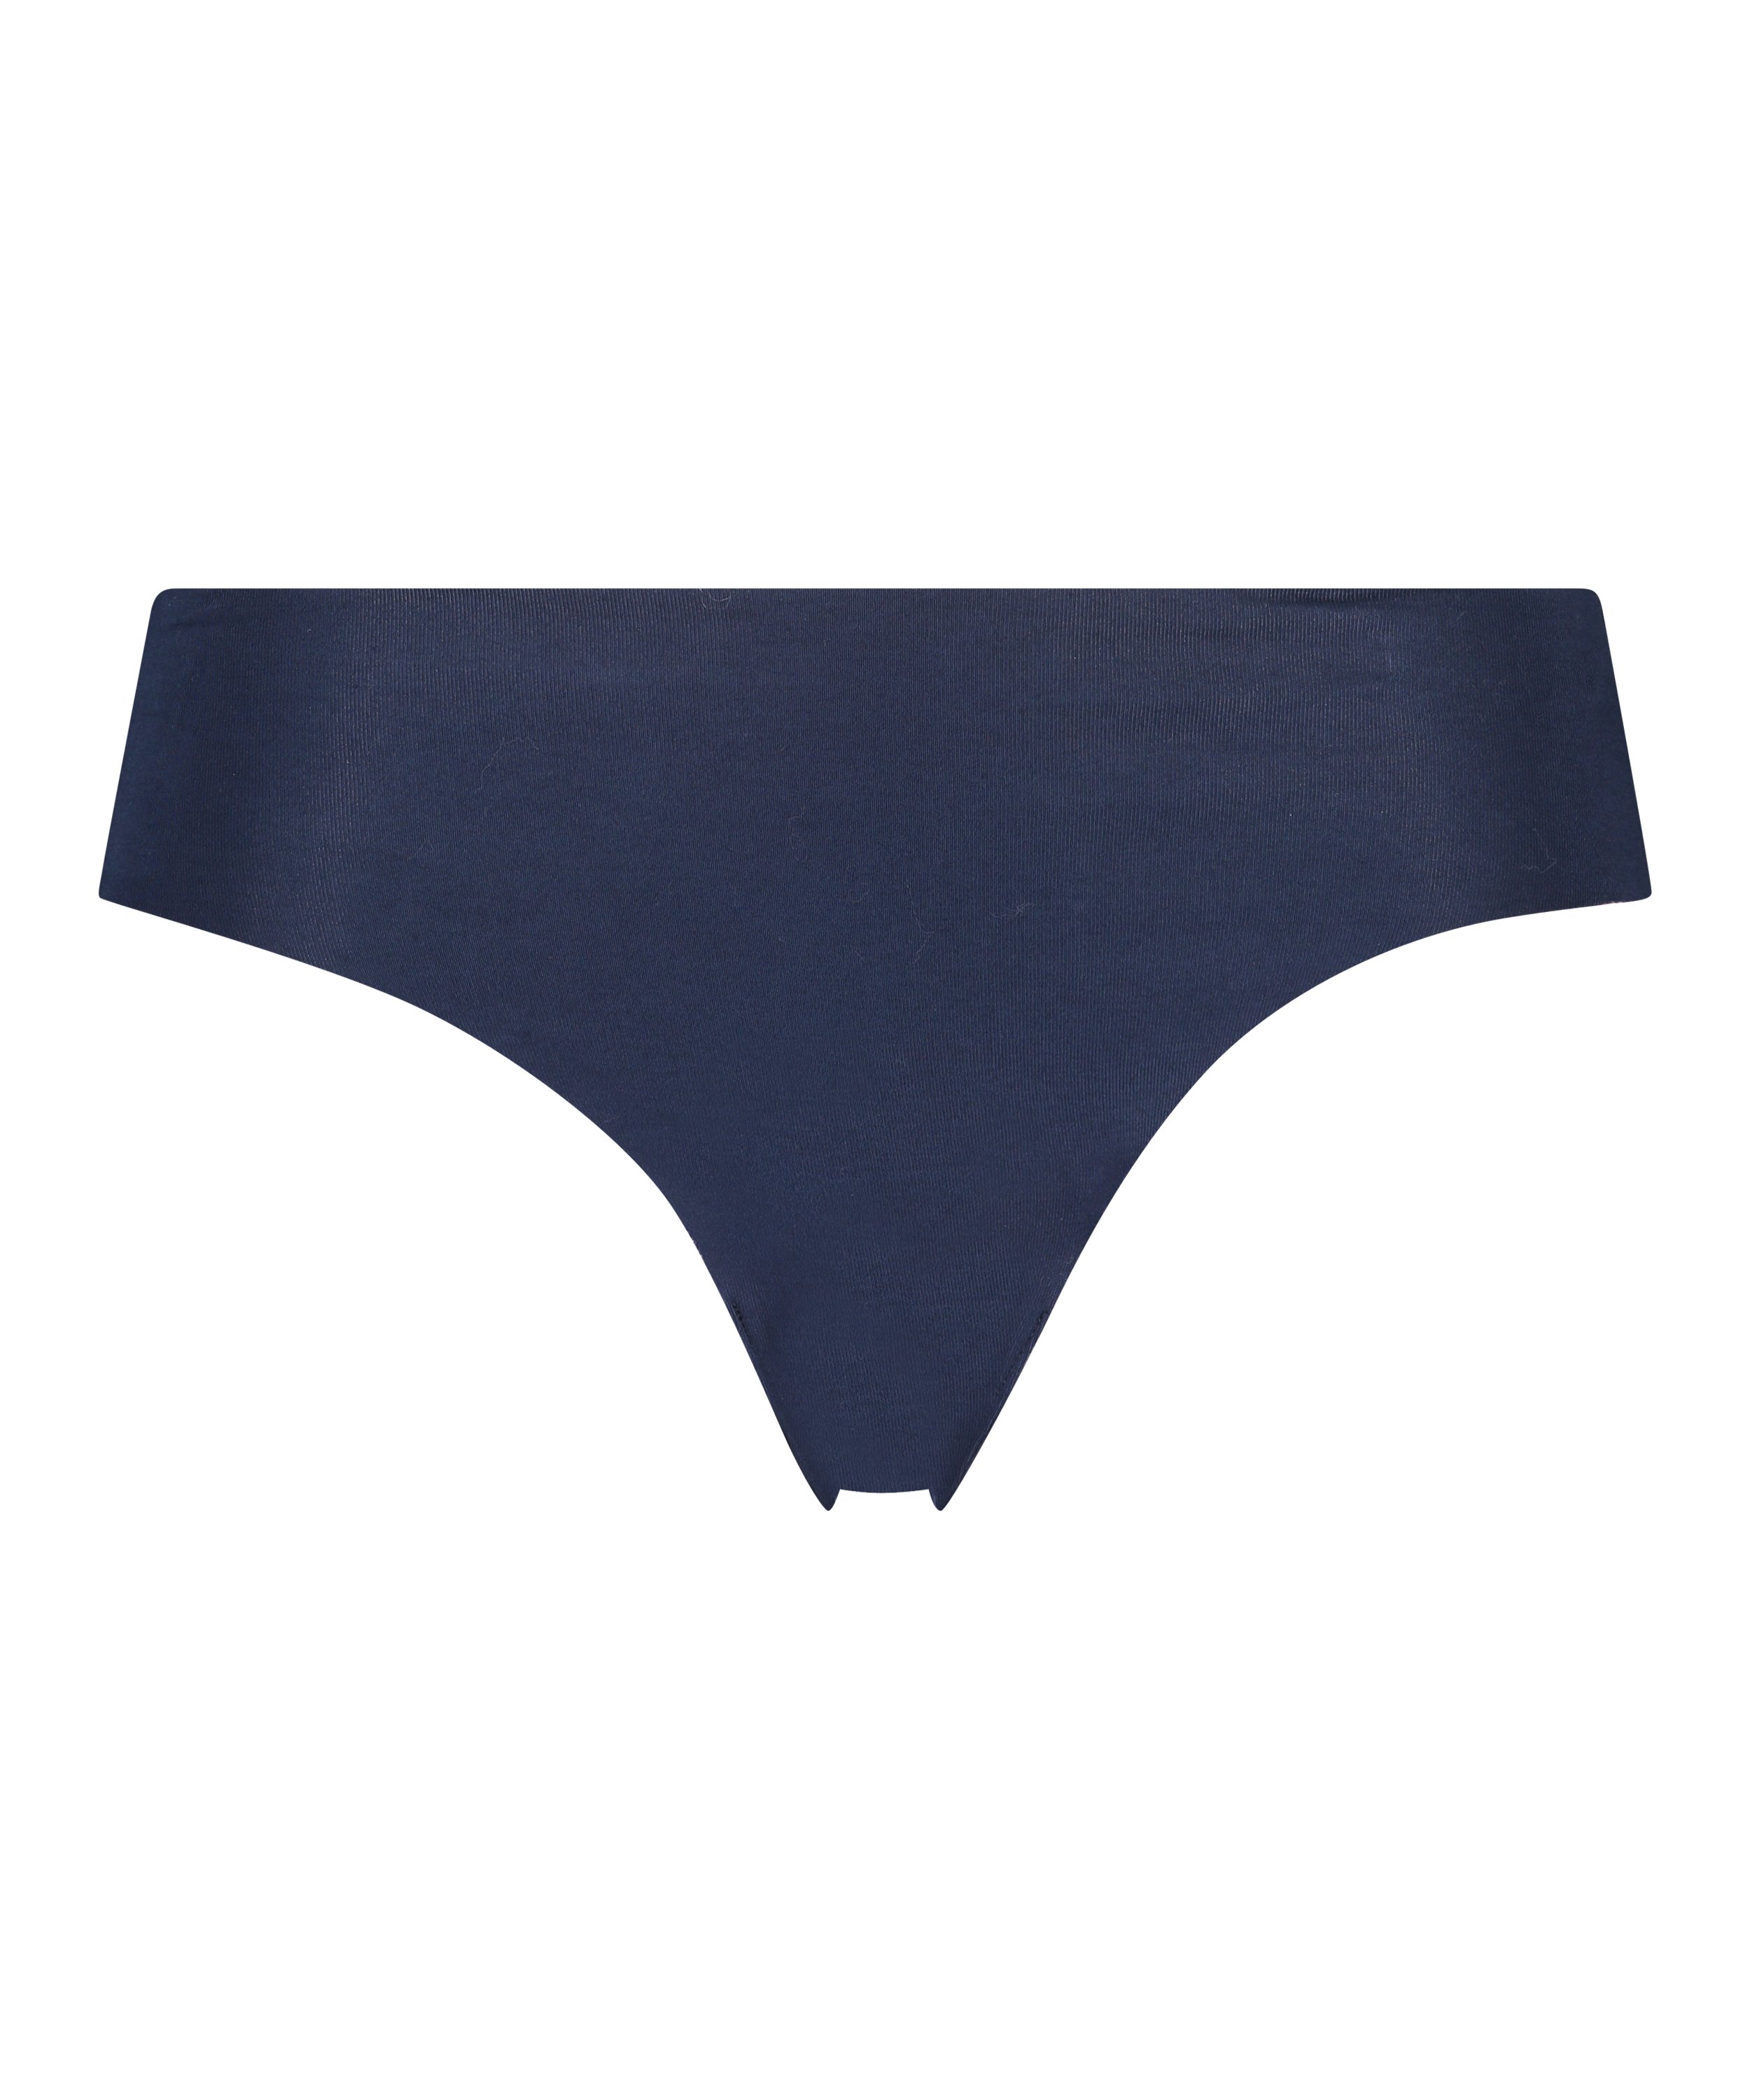 Invisible cotton knickers, Blue, main